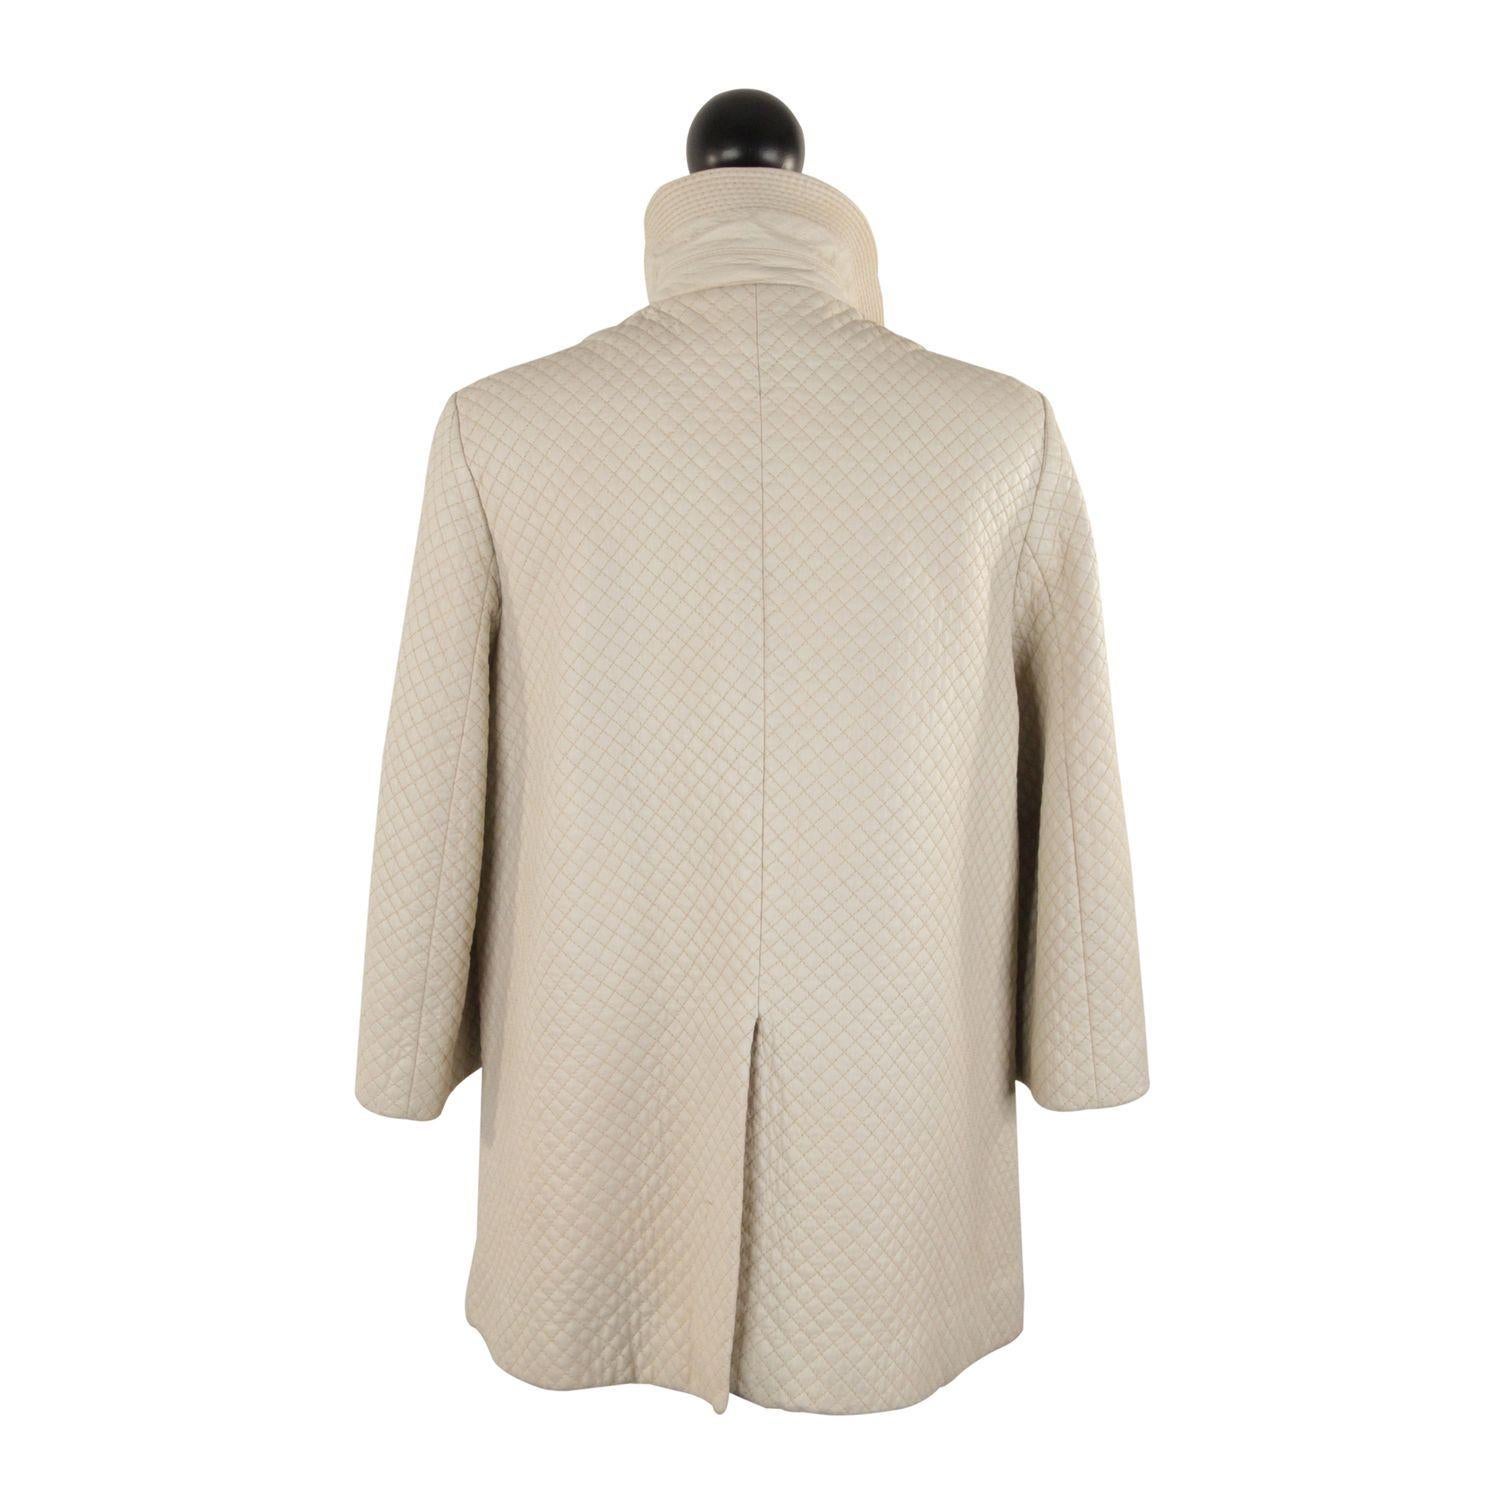 MATERIAL: Leather COLOR: Ivory MODEL: Coat GENDER: Women SIZE: Small Condition A: EXCELLENT CONDITION - Gently used - Hardly any wear of use Measurements SHOULDER TO SHOULDER: 15 inches - 38,1 cm BUST: 18 1/2 inches - 47 cm (from underarm to